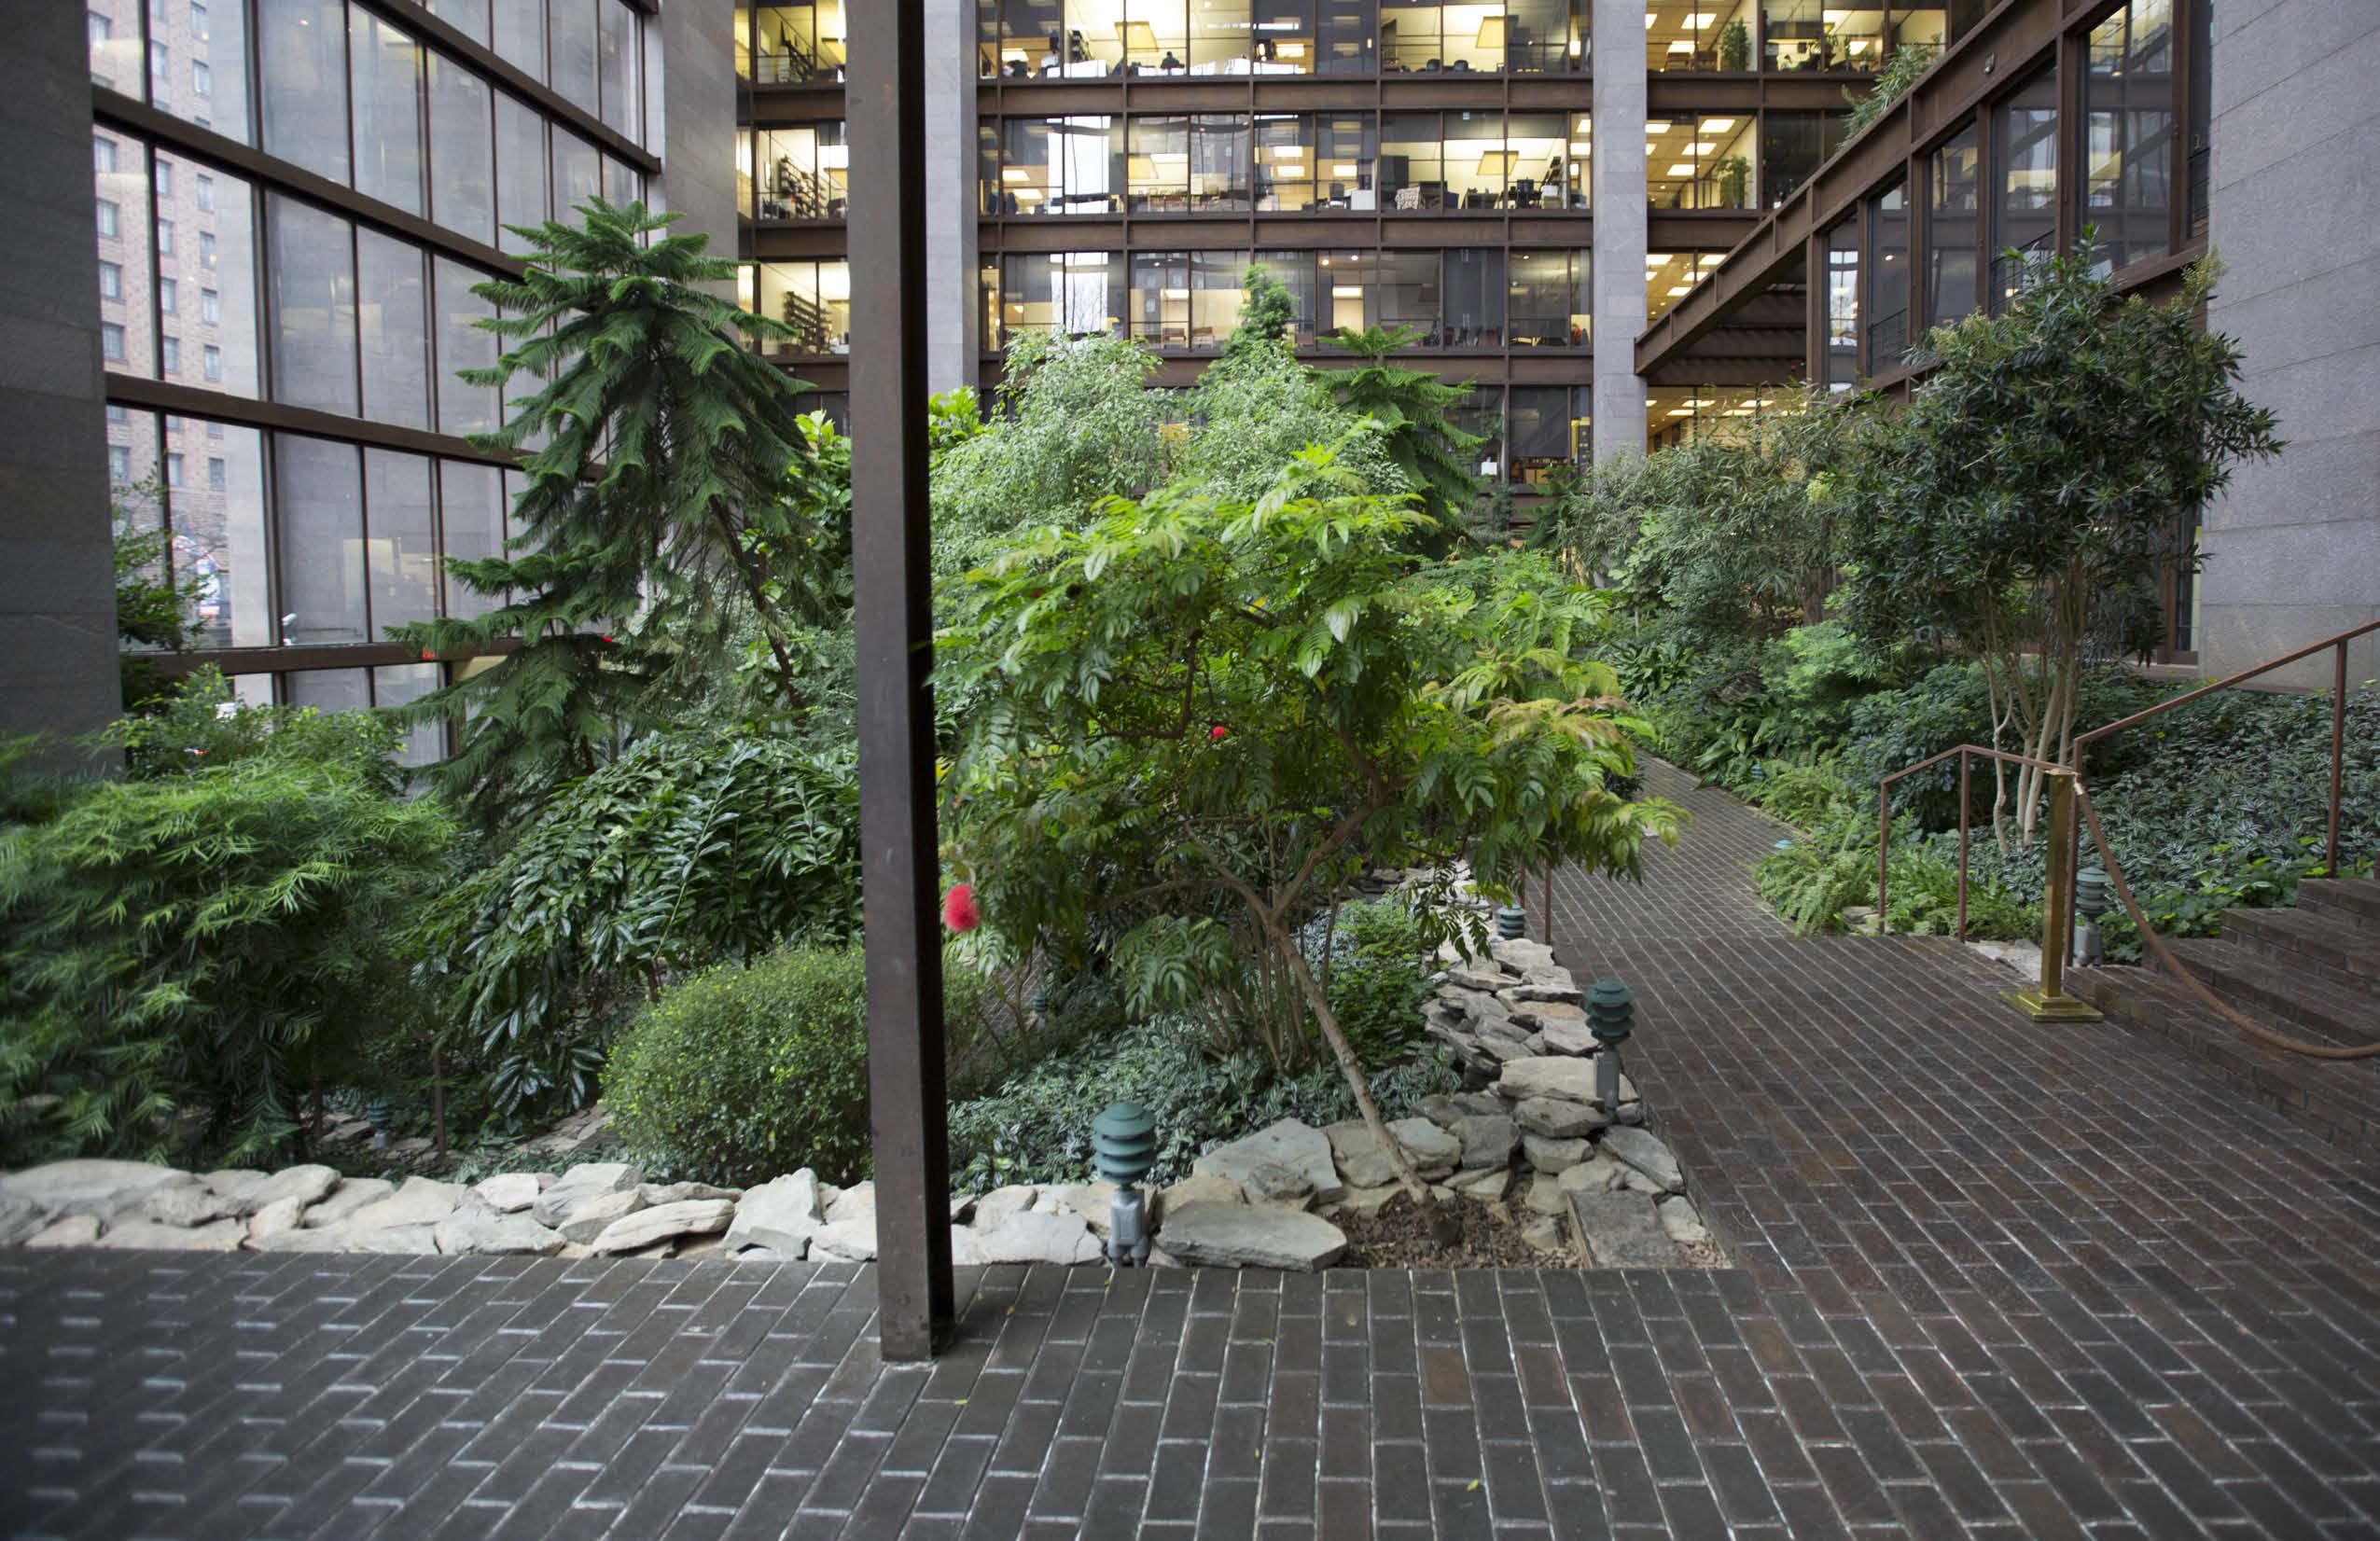 Existing conditions at the Ford Foundation Building